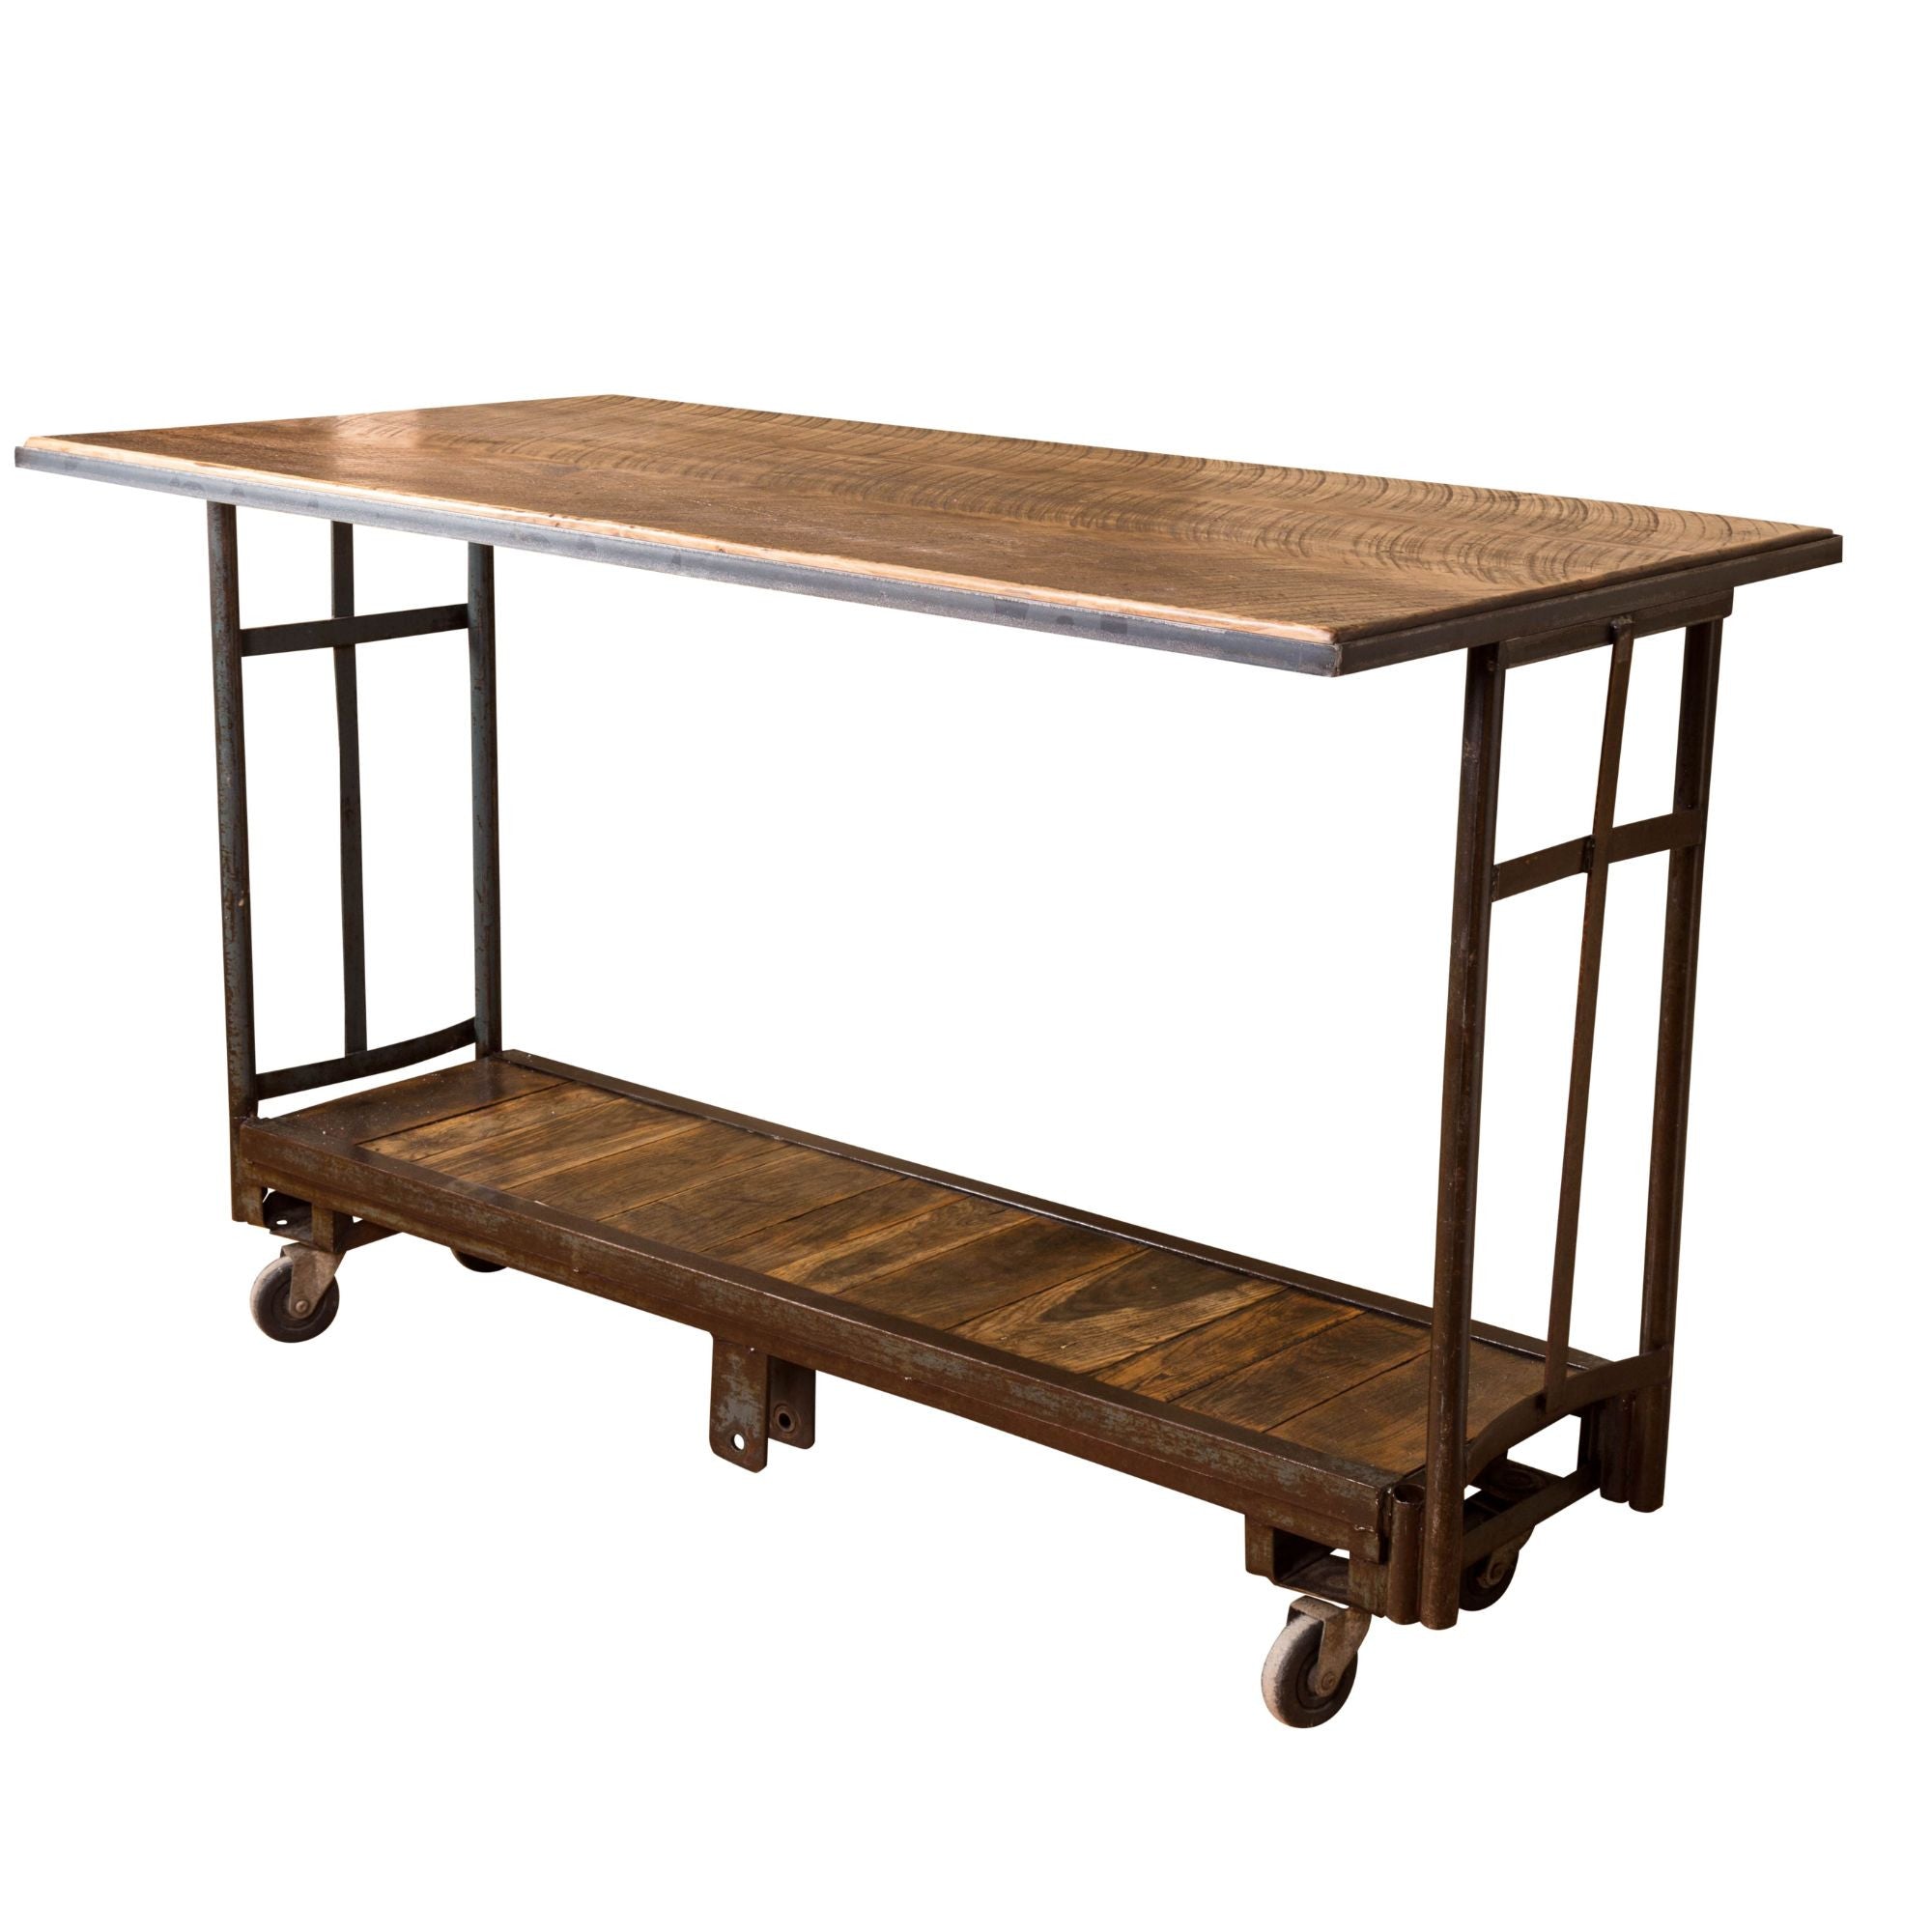 64" Brown And Black Rustic Solid Wood High Top Bar Table